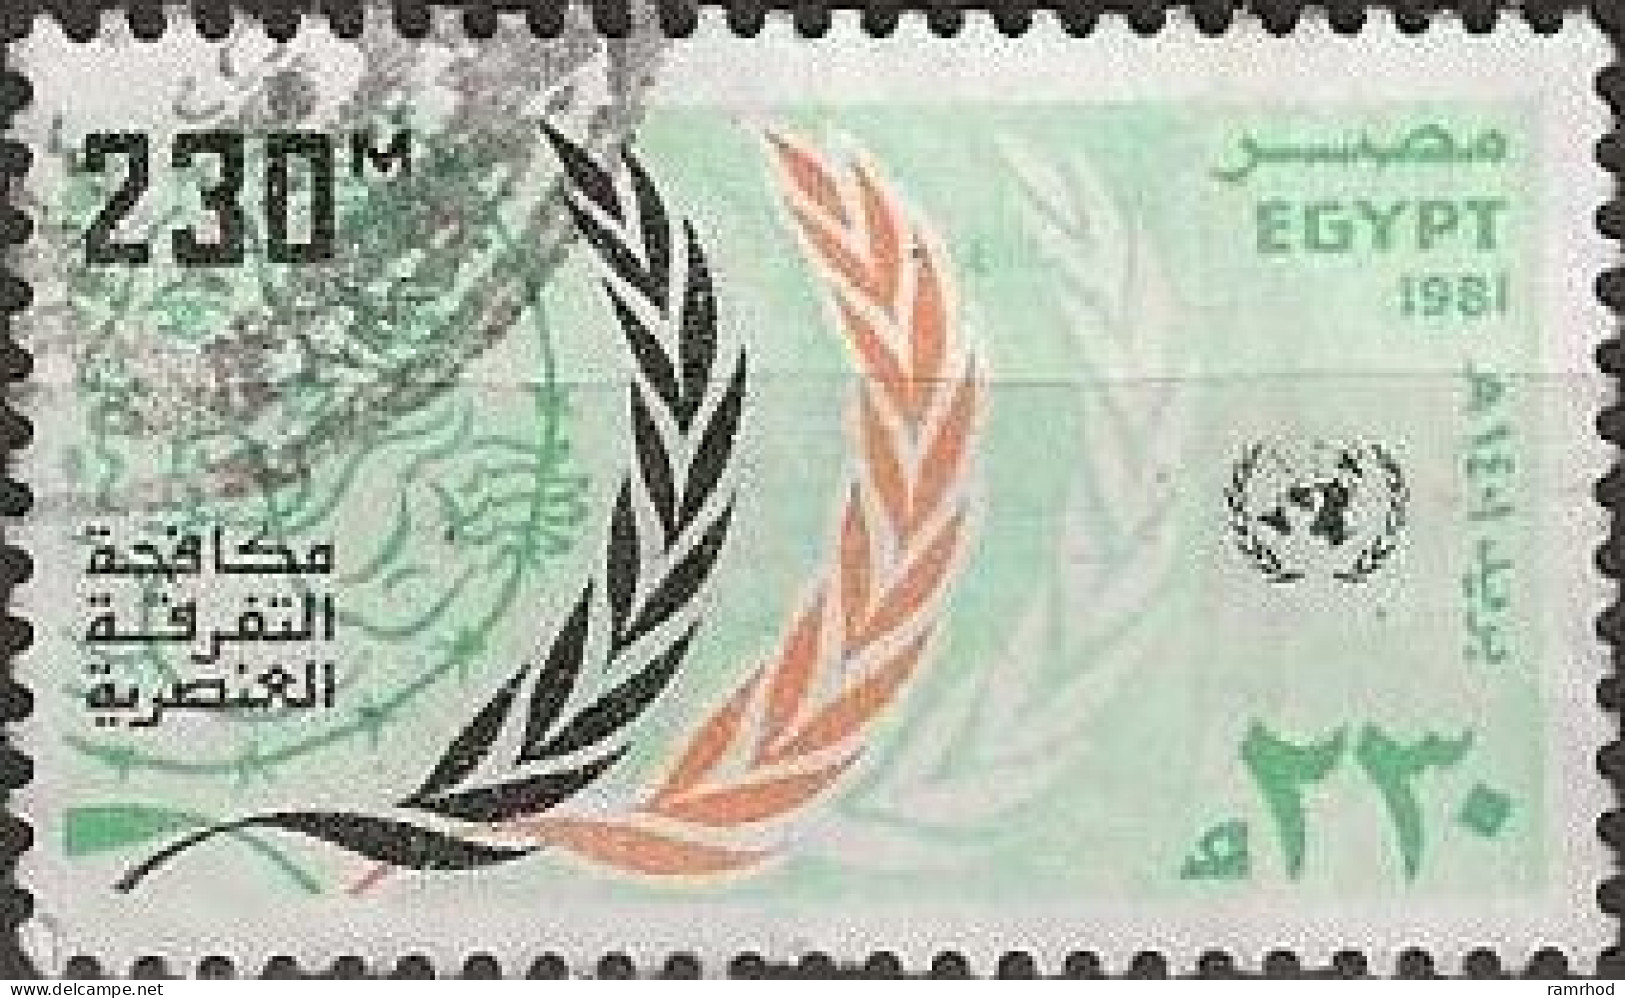 EGYPT 1981 United Nations Day - 230m. Olive Branches (Racial Discrimination Day) FU - Usados